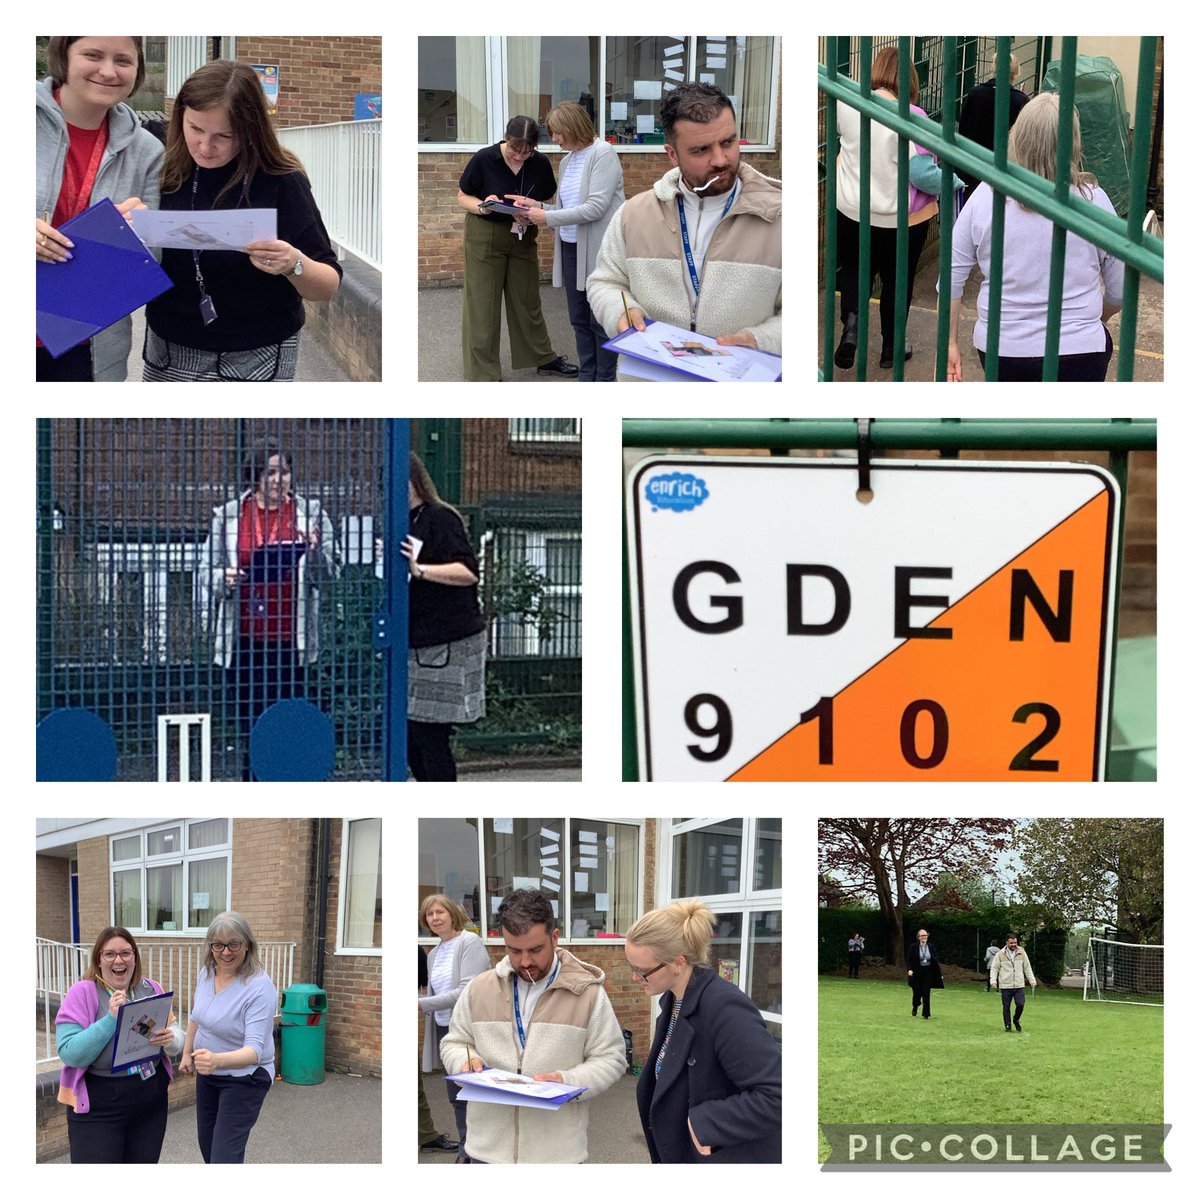 Yesterday, the teachers had a practical training session on orienteering. They worked together in pairs to solve different challenges. They had to use their oracy skills, work in cooperation with each other as well as develop their map reading skills.